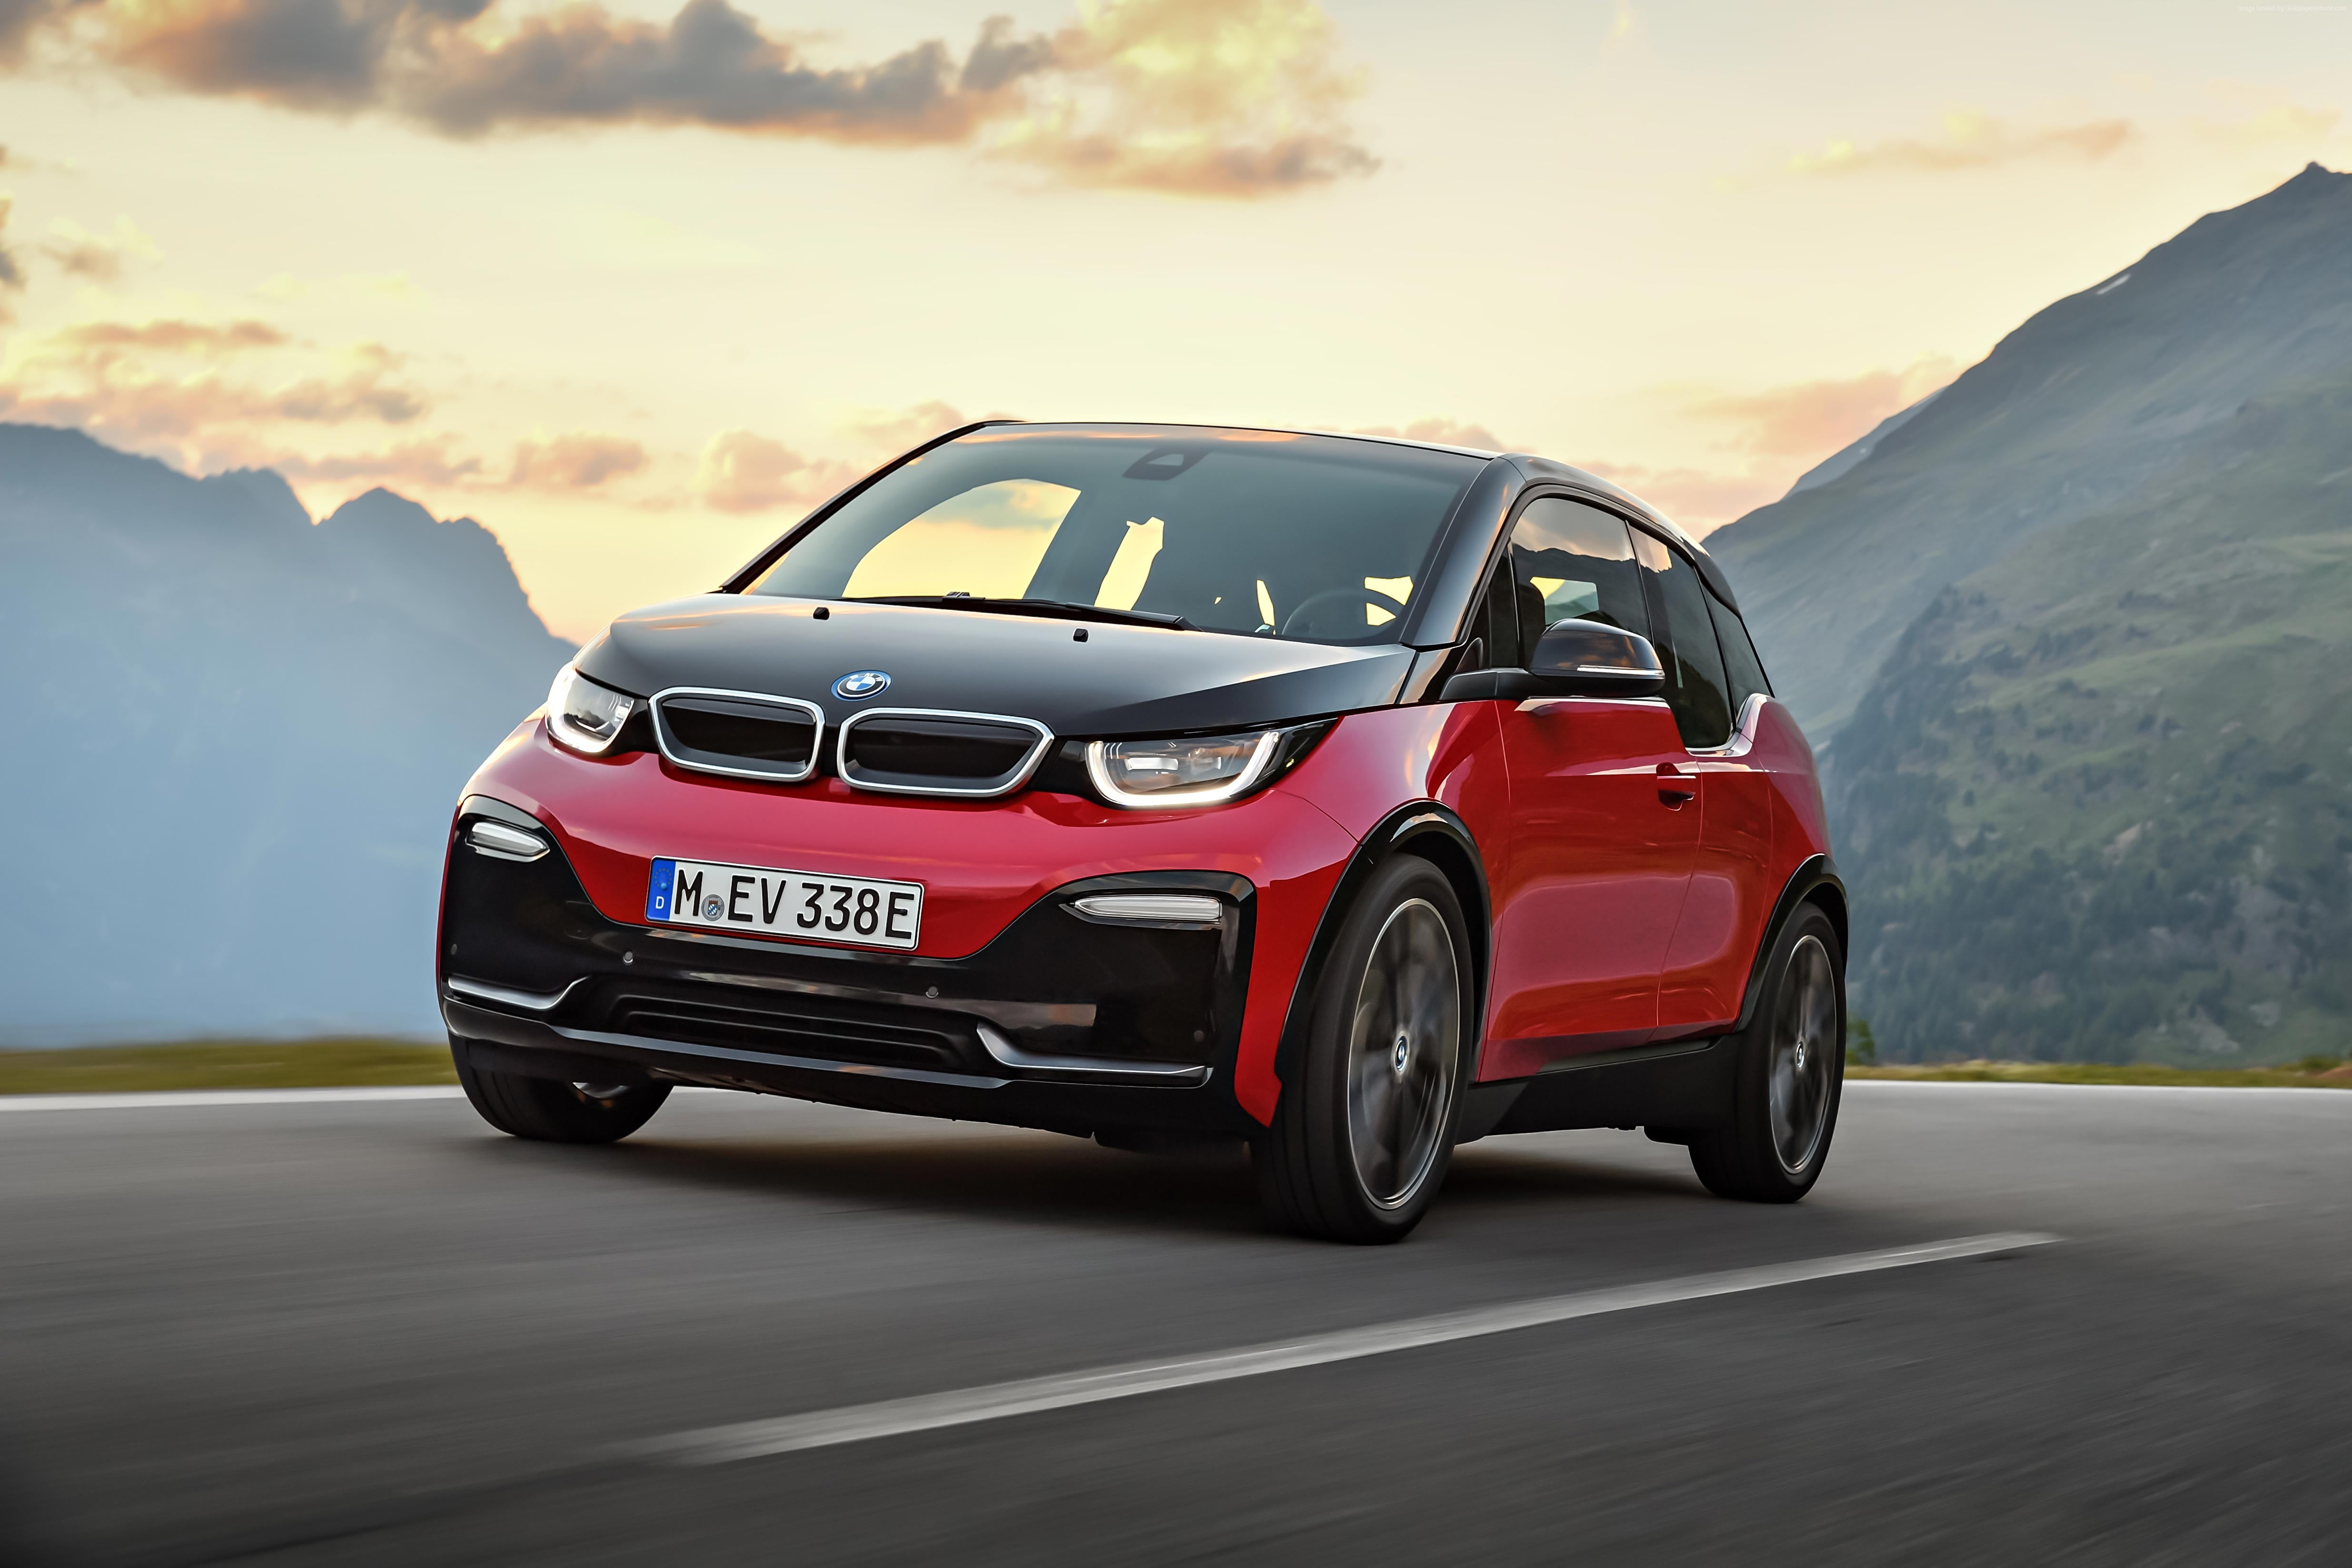 Red And Black Bmw I3 Running On Road Hd Wallpaper Wallpaper Flare